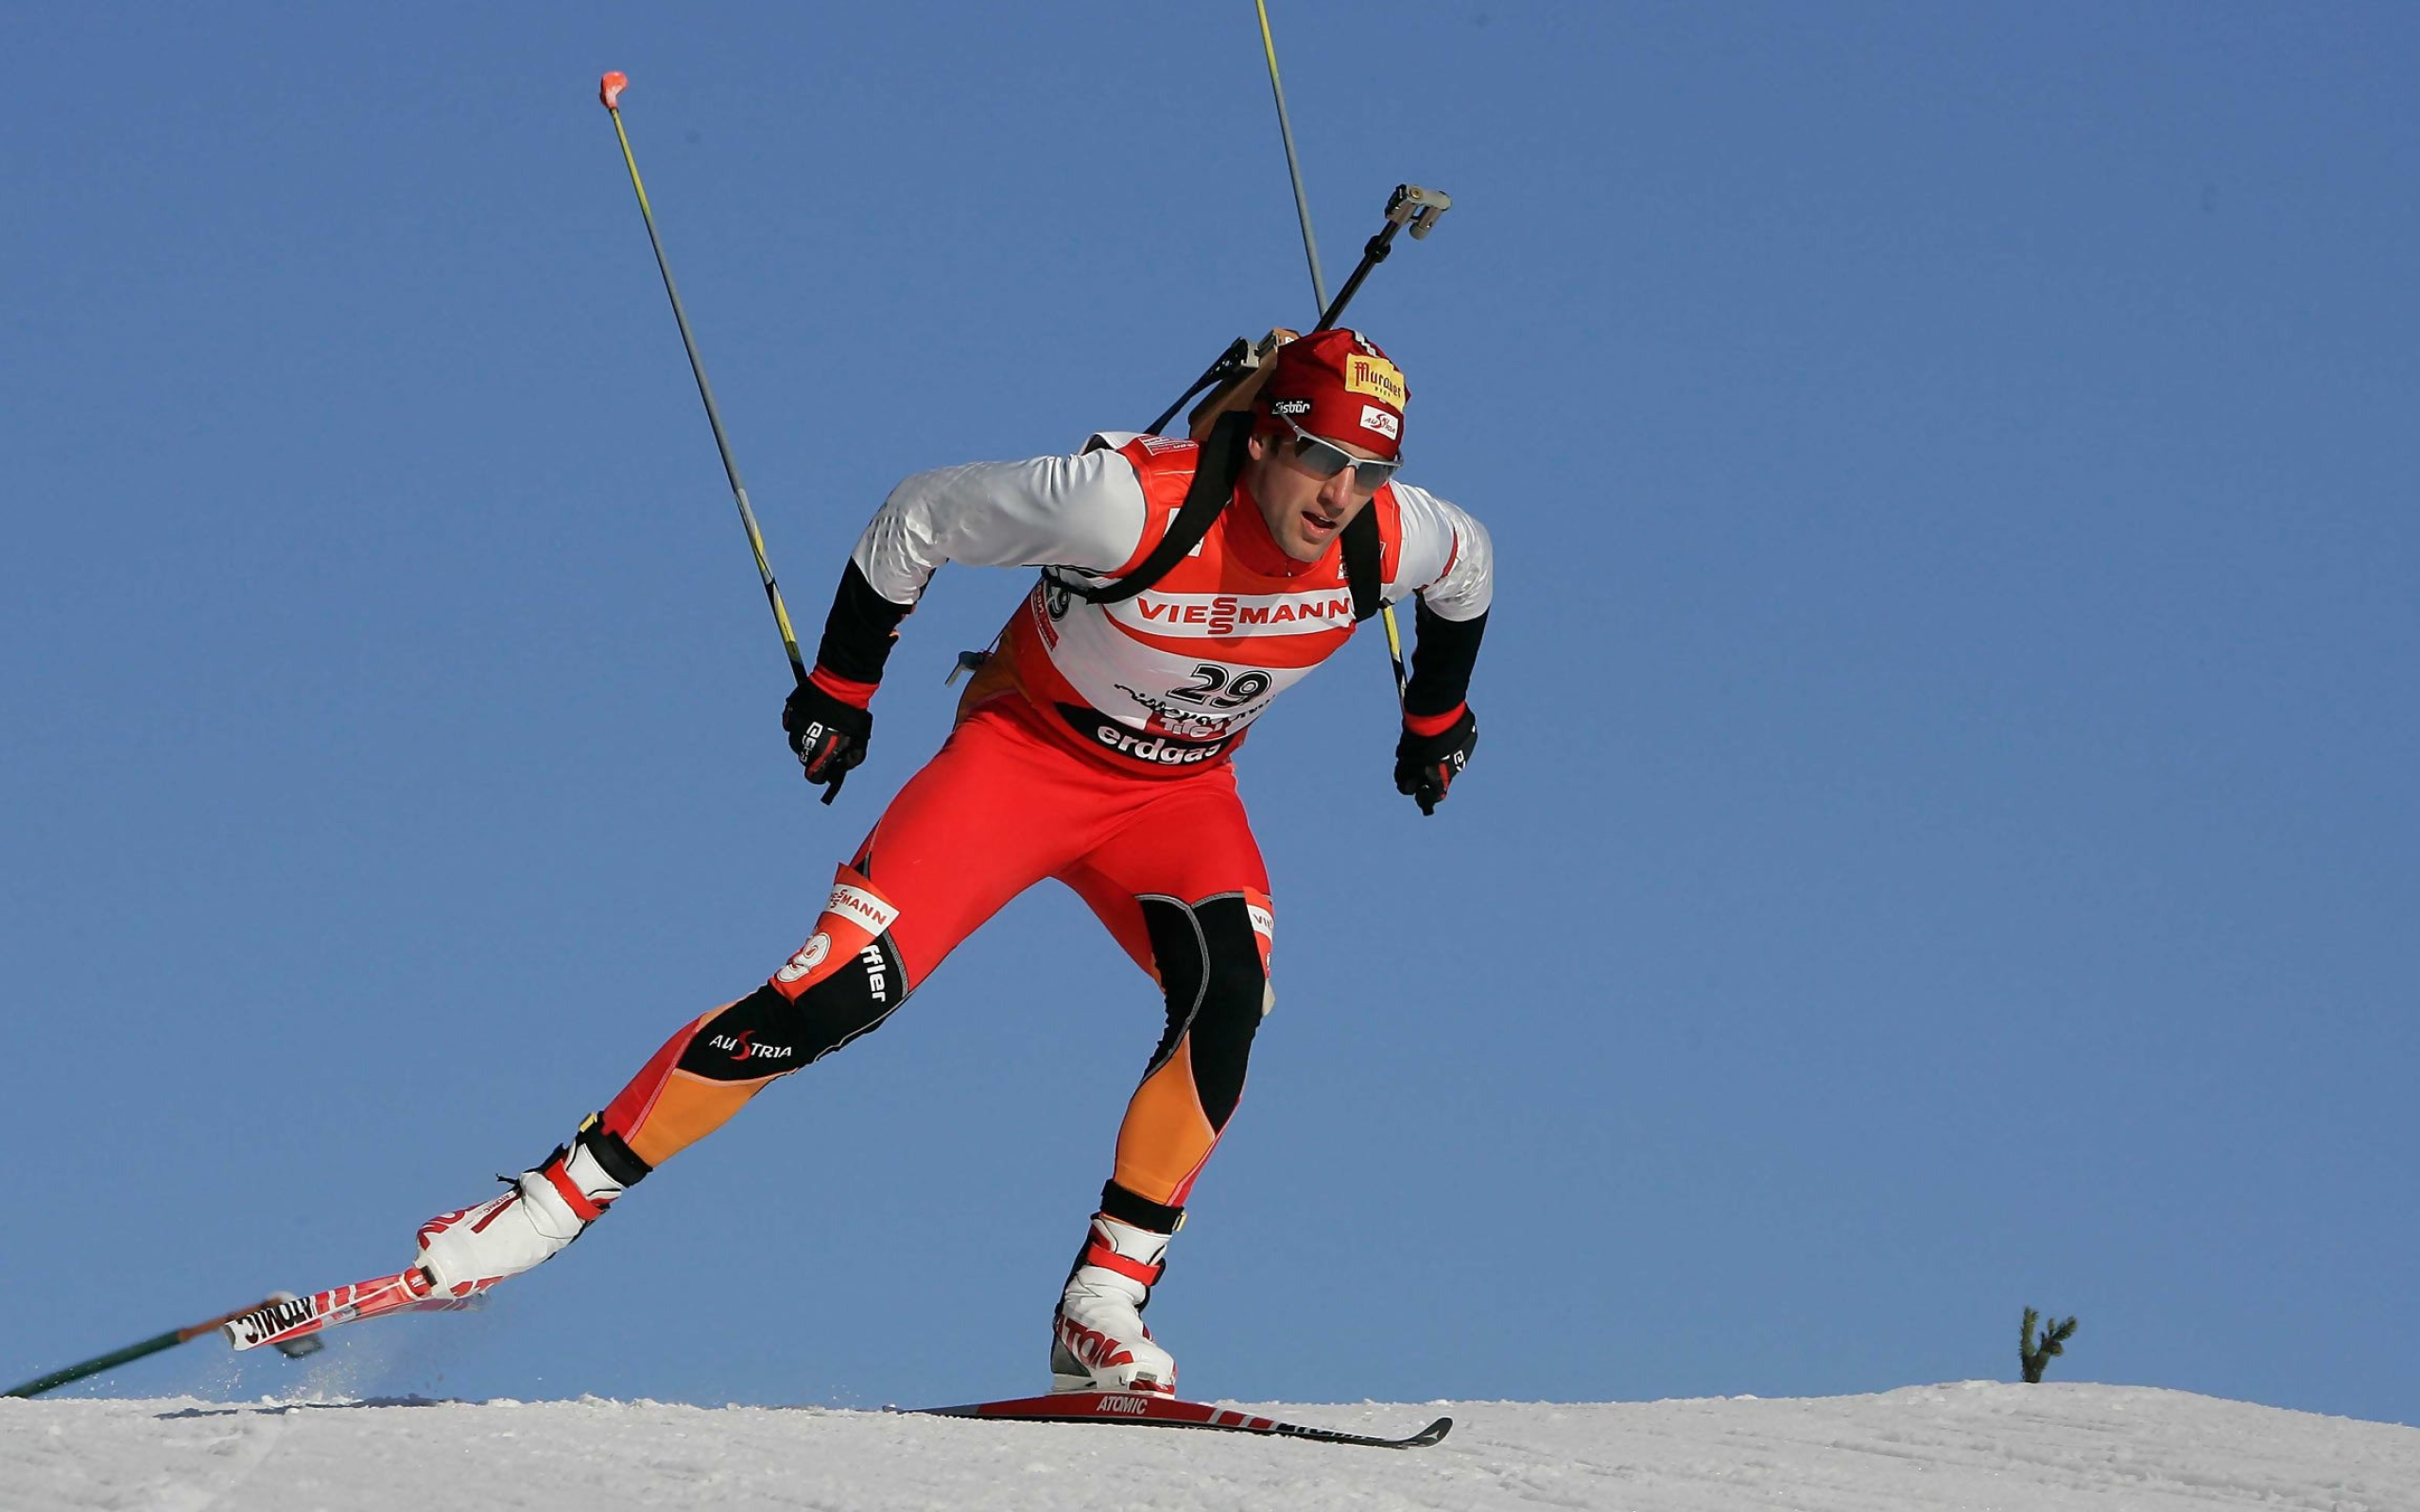 Biathlon: Skiing through a cross-country trail system, Shooting rounds, Targets. 2560x1600 HD Wallpaper.